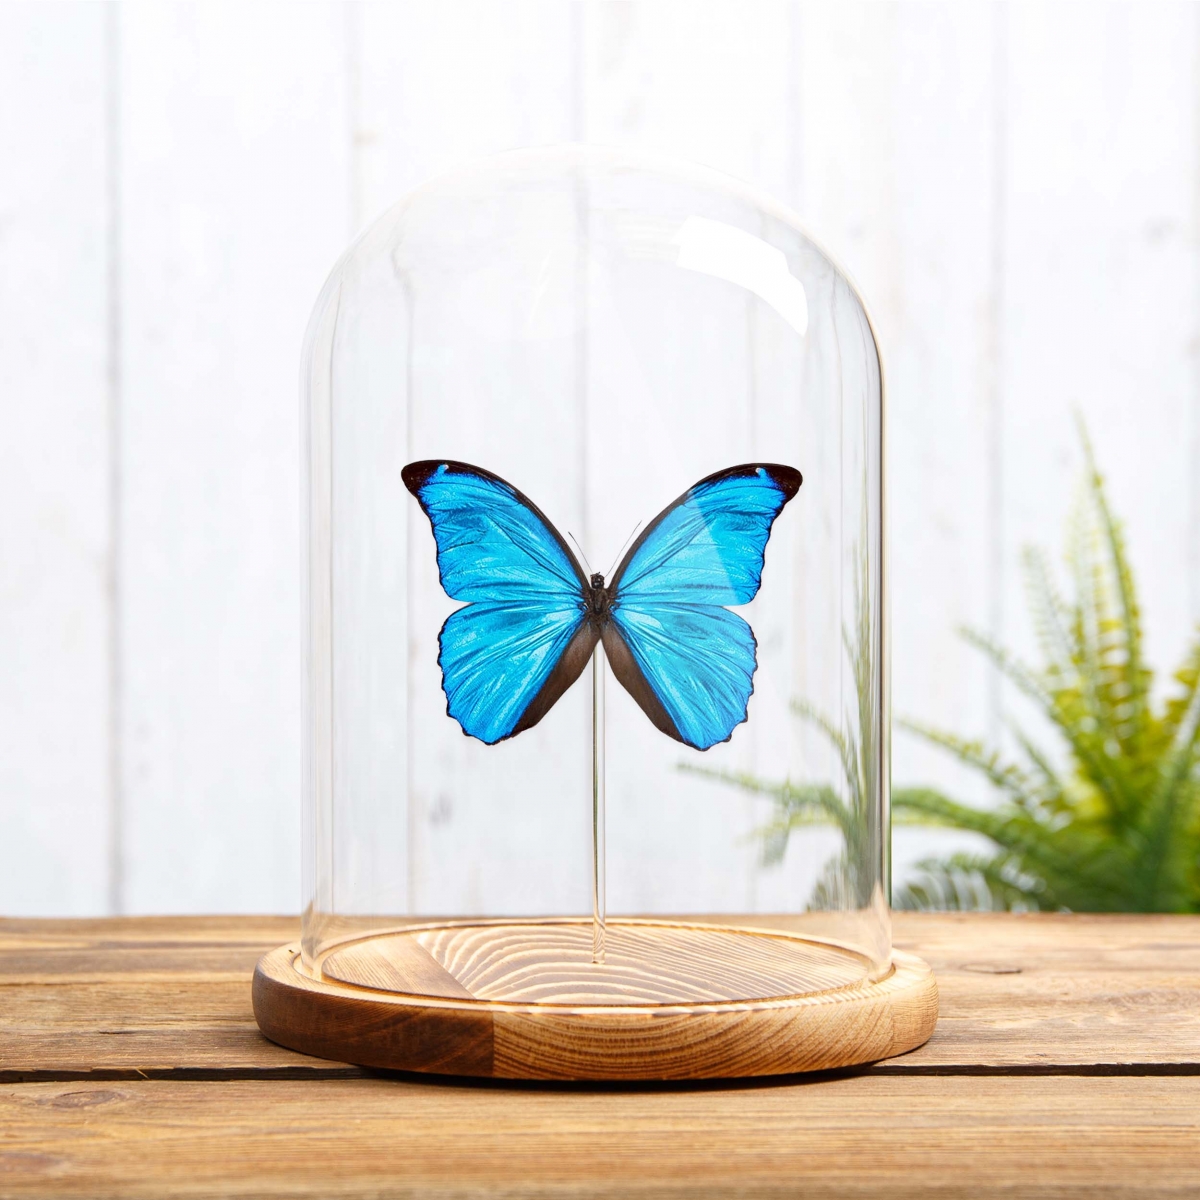 Menelaus Blue Morpho Butterfly in Glass Dome with Wooden Base (Morpho menelaus)